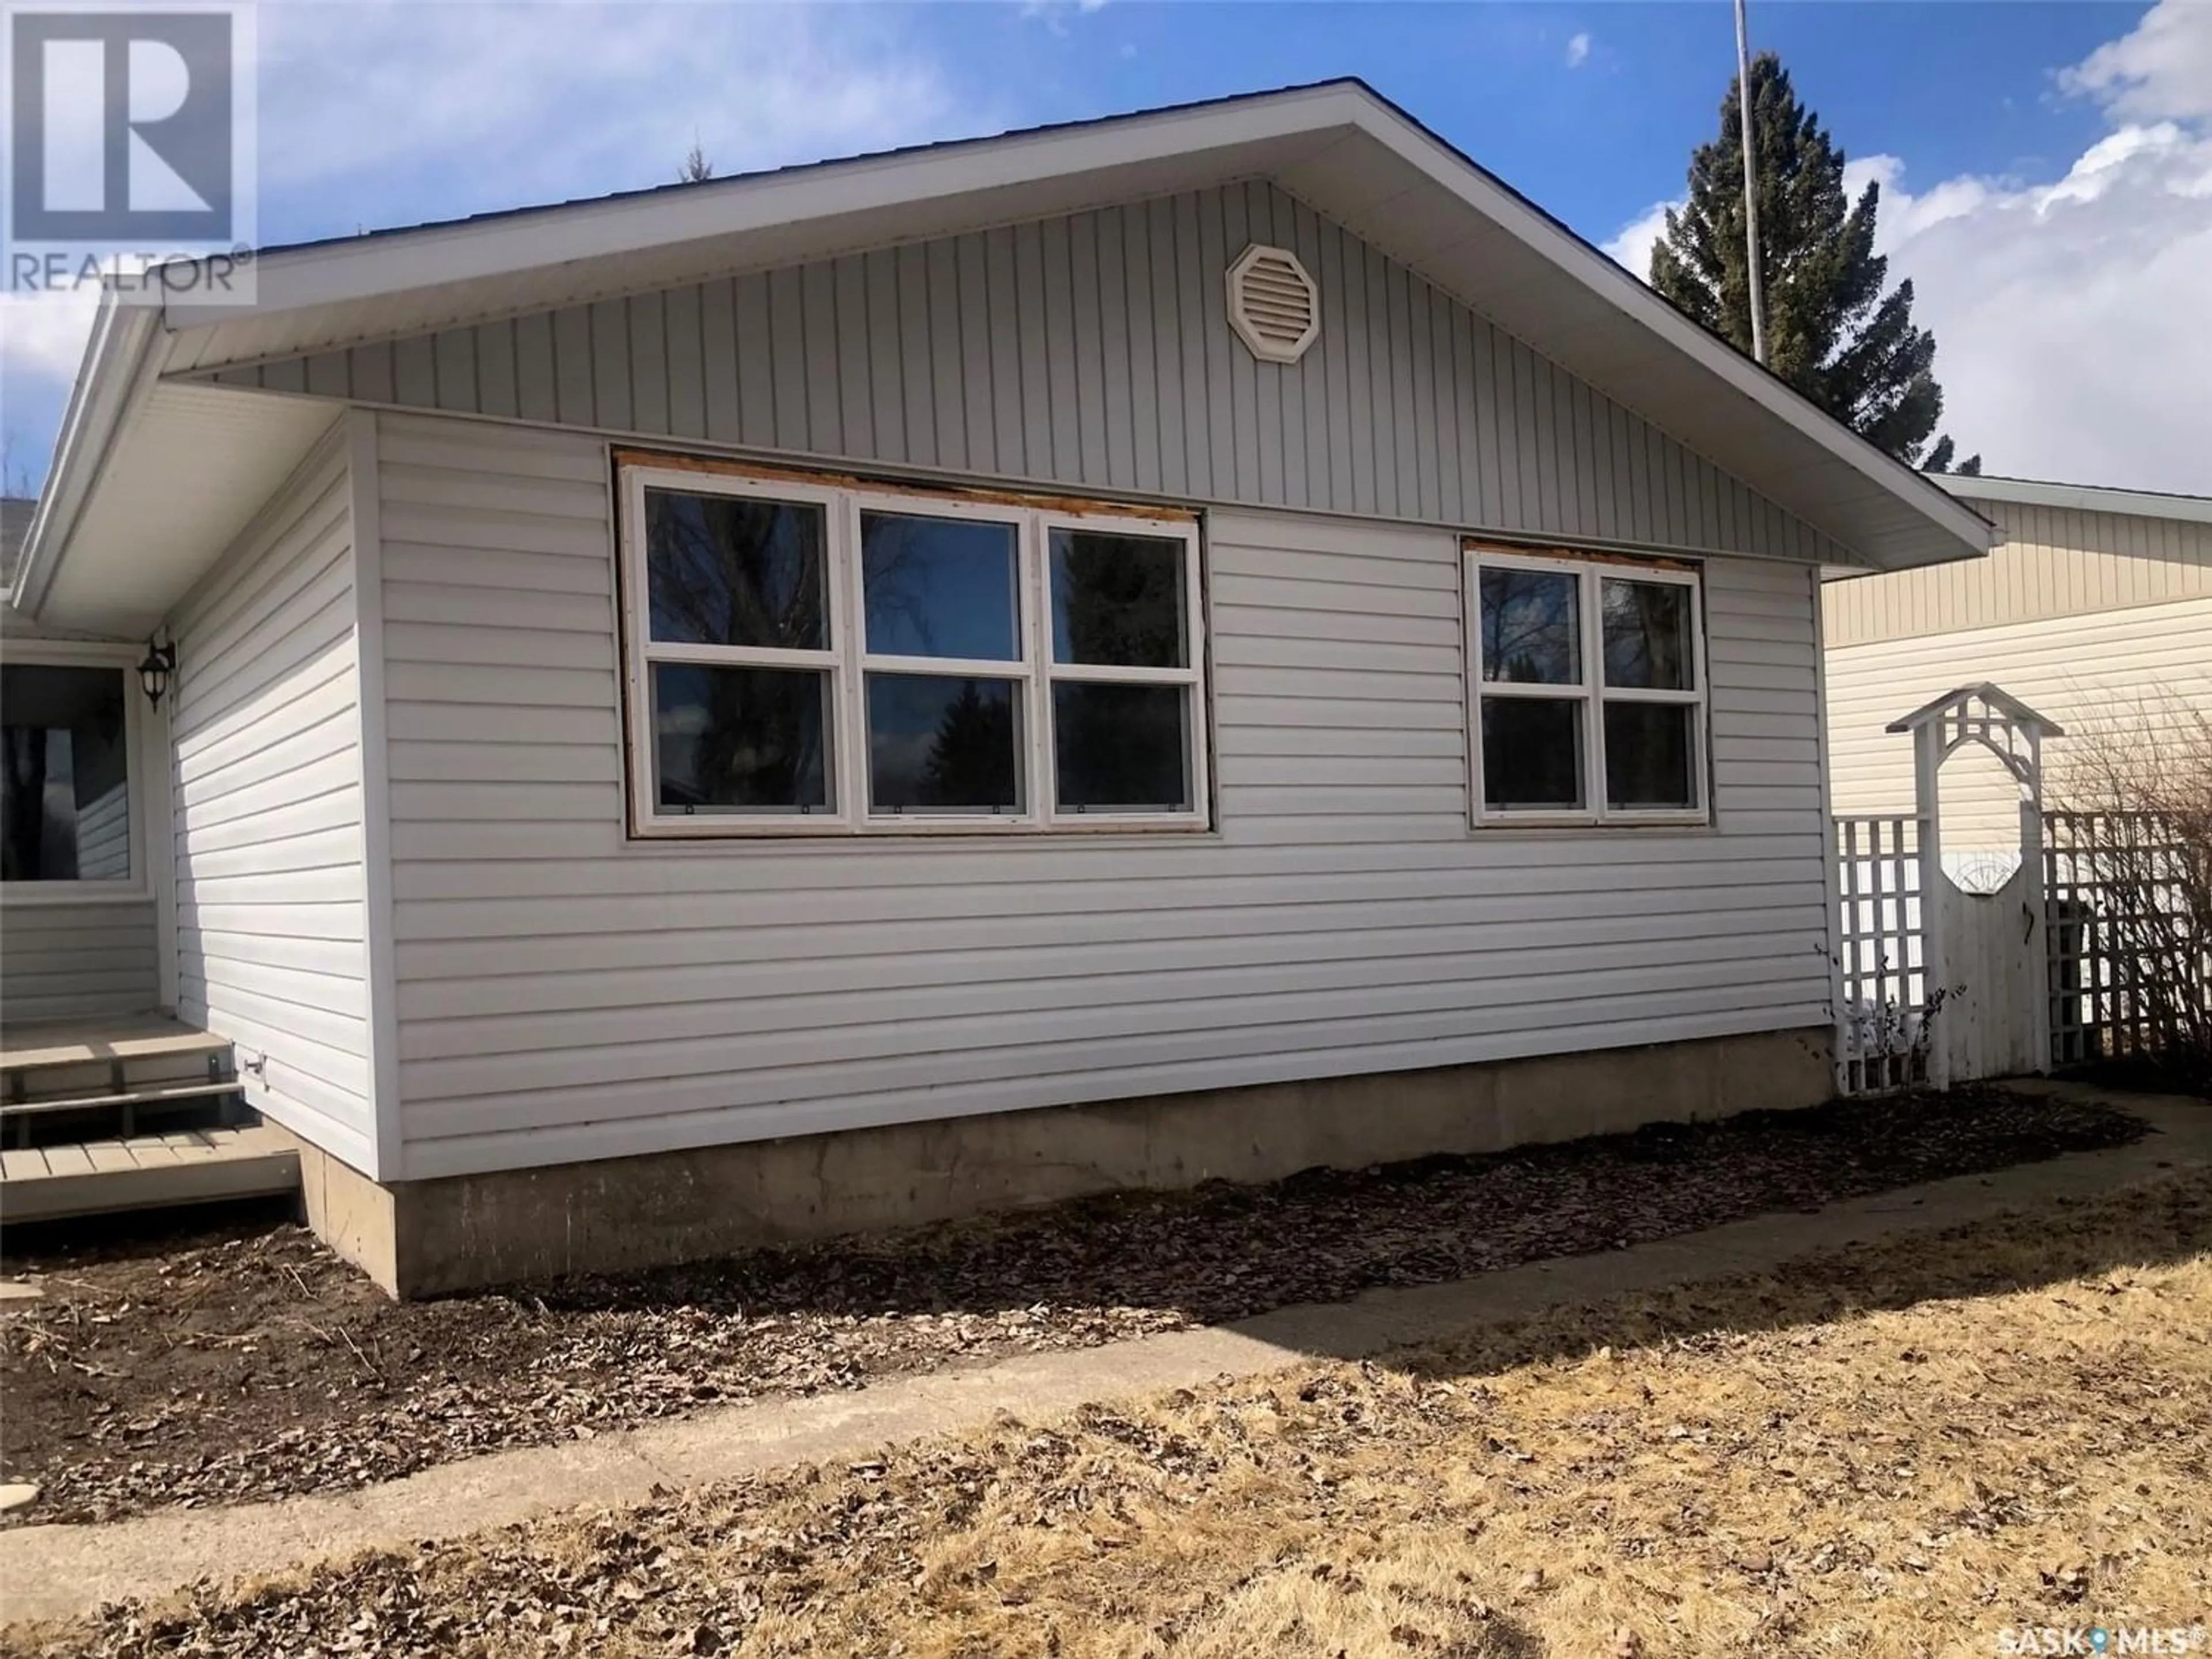 Home with vinyl exterior material for 172 Jubilee CRESCENT, Canora Saskatchewan S0A0L0